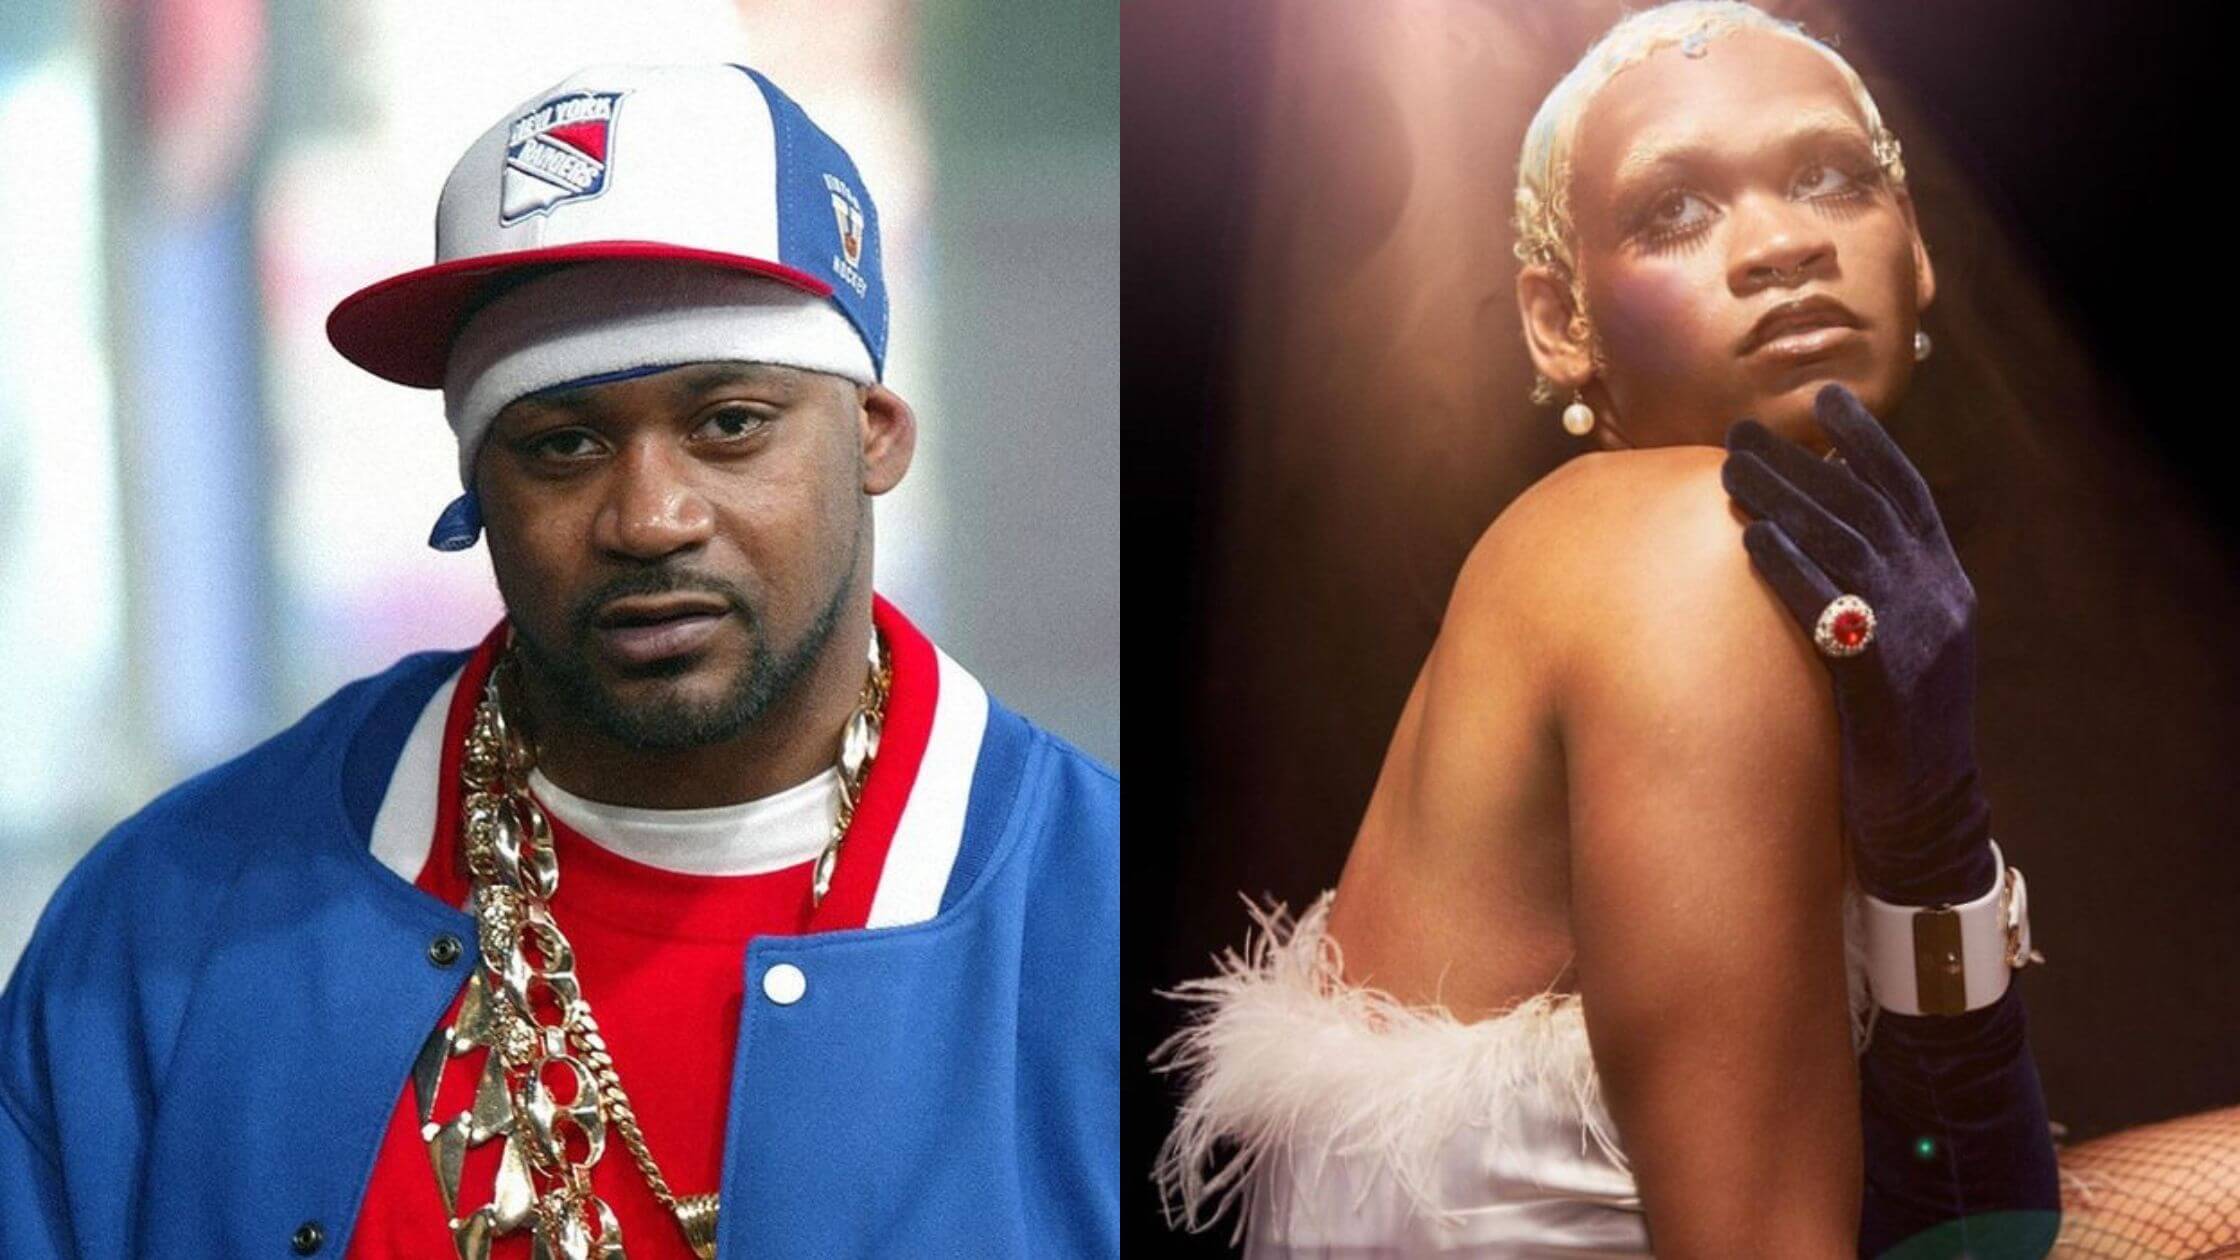 Ghostface Killah’s gay son claims the Wu-Tang Clan co-founder neglected him and his other siblings for most of their lives.